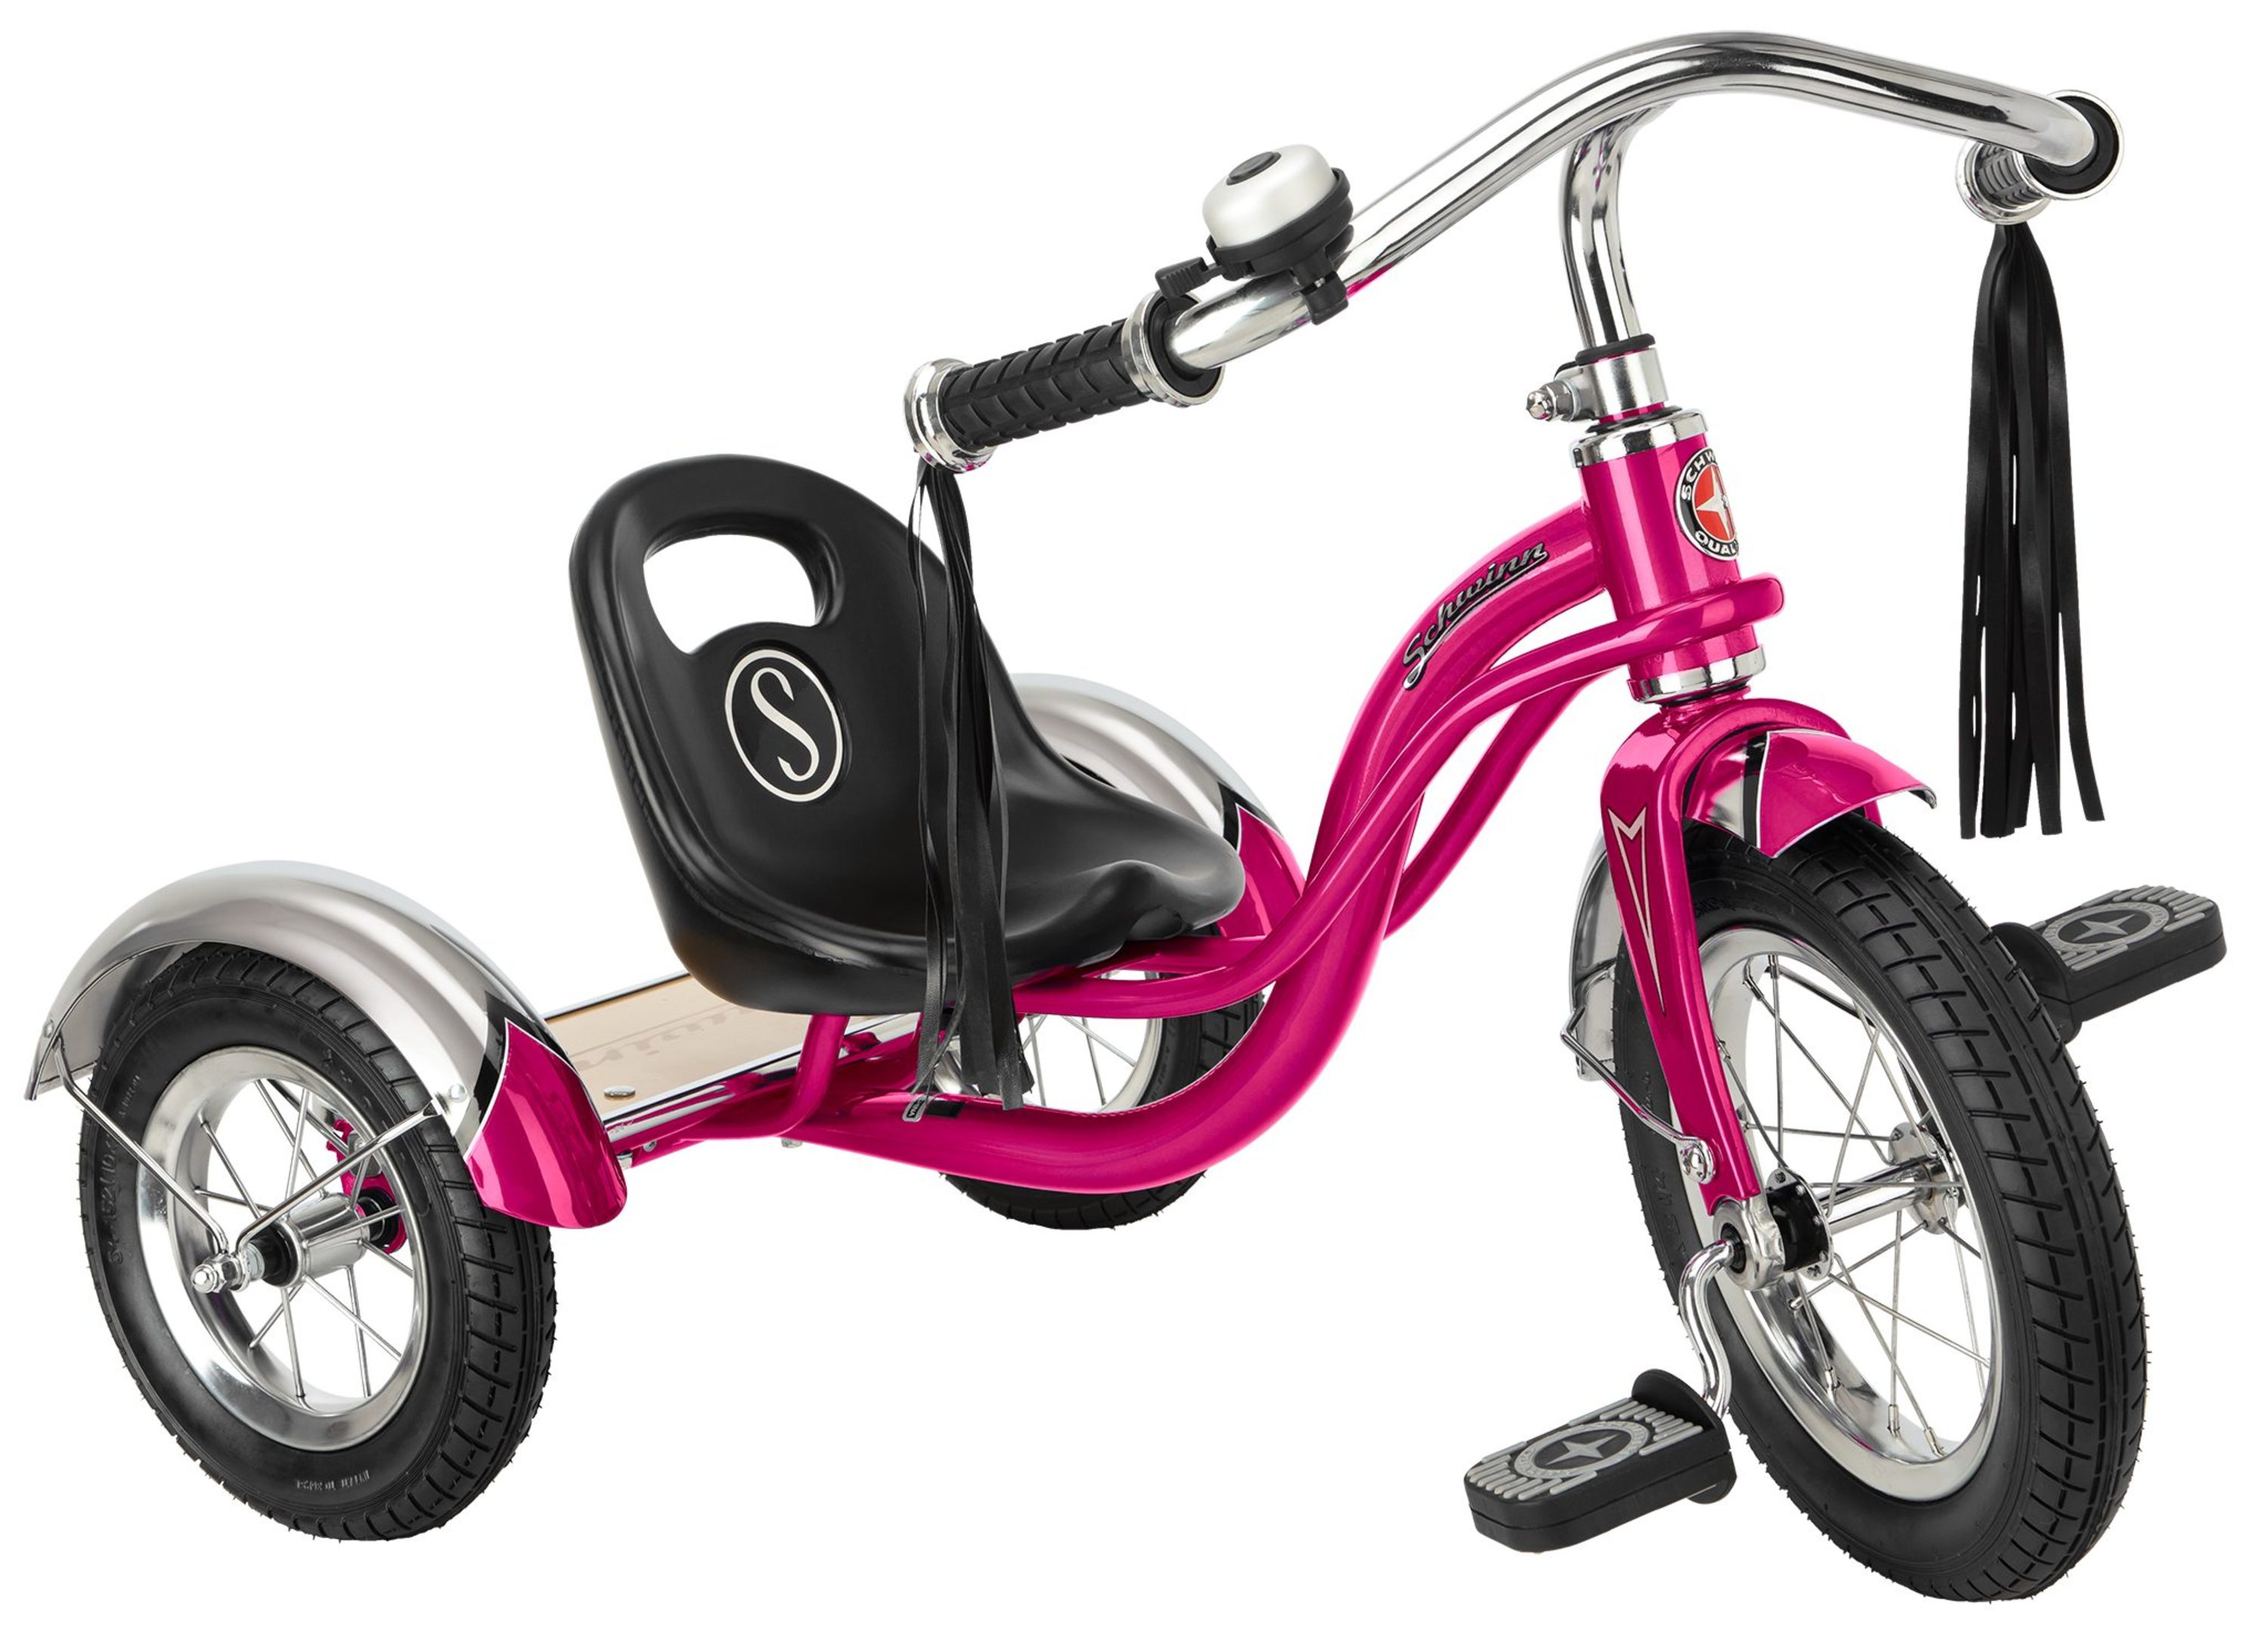 Schwinn Roadster Retro-Style Tricycle, 12-inch front wheel, ages 2 - 4, hot pink - image 1 of 7